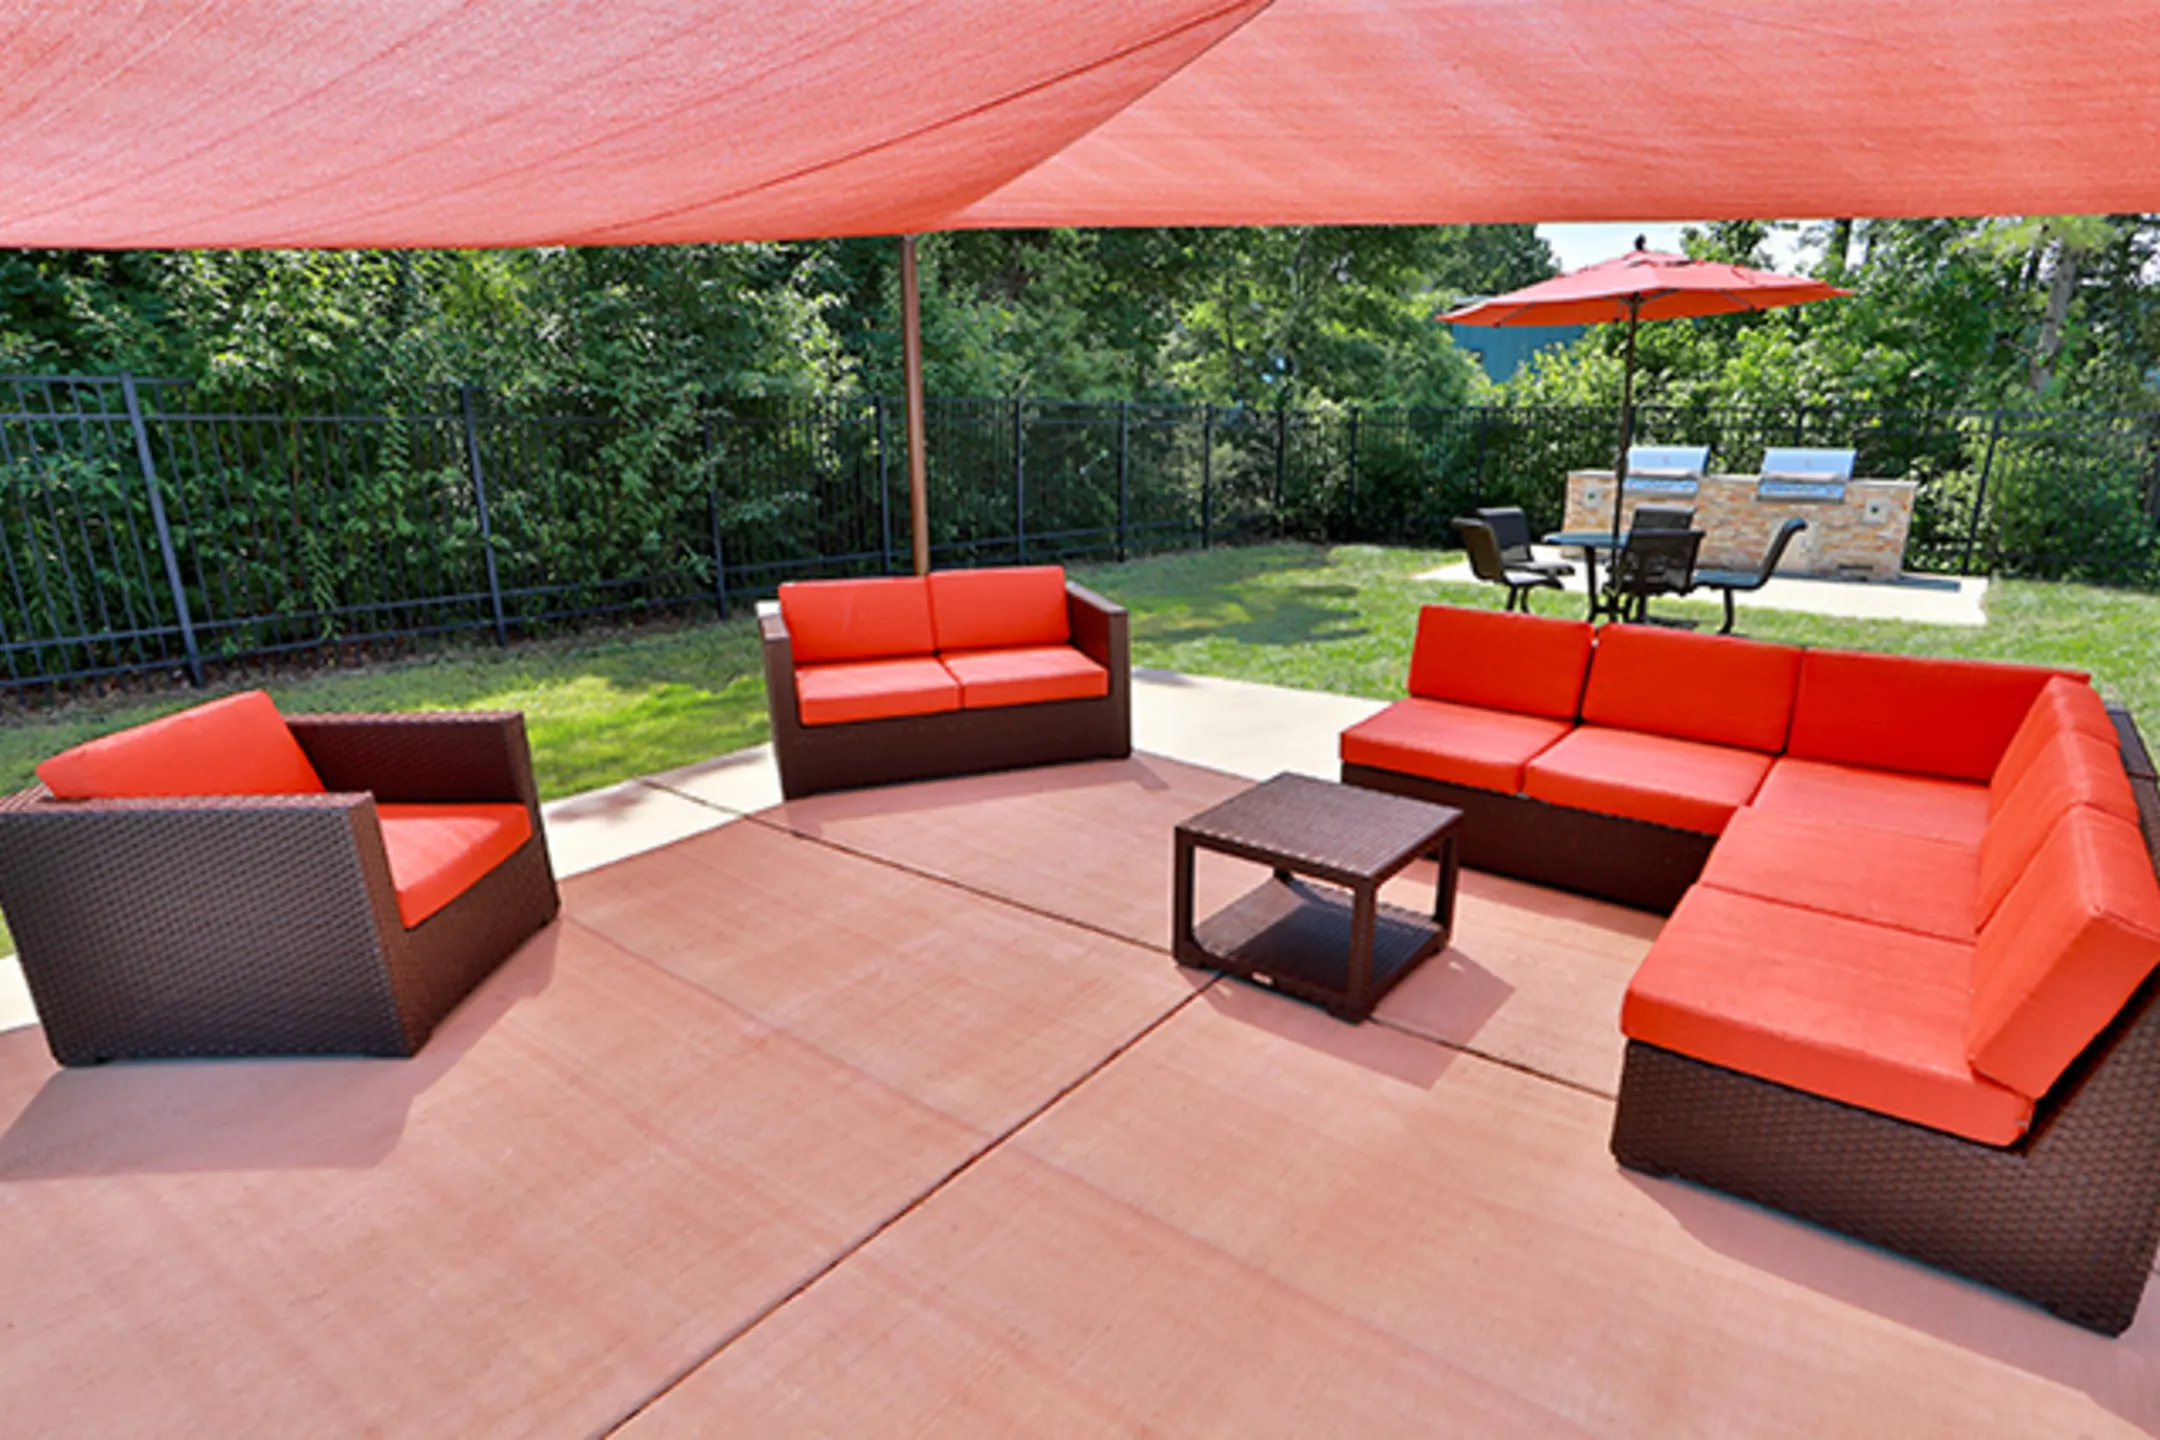 Patio / Deck - St. Mary's Landing Apartments and Townhomes - Lexington Park, MD